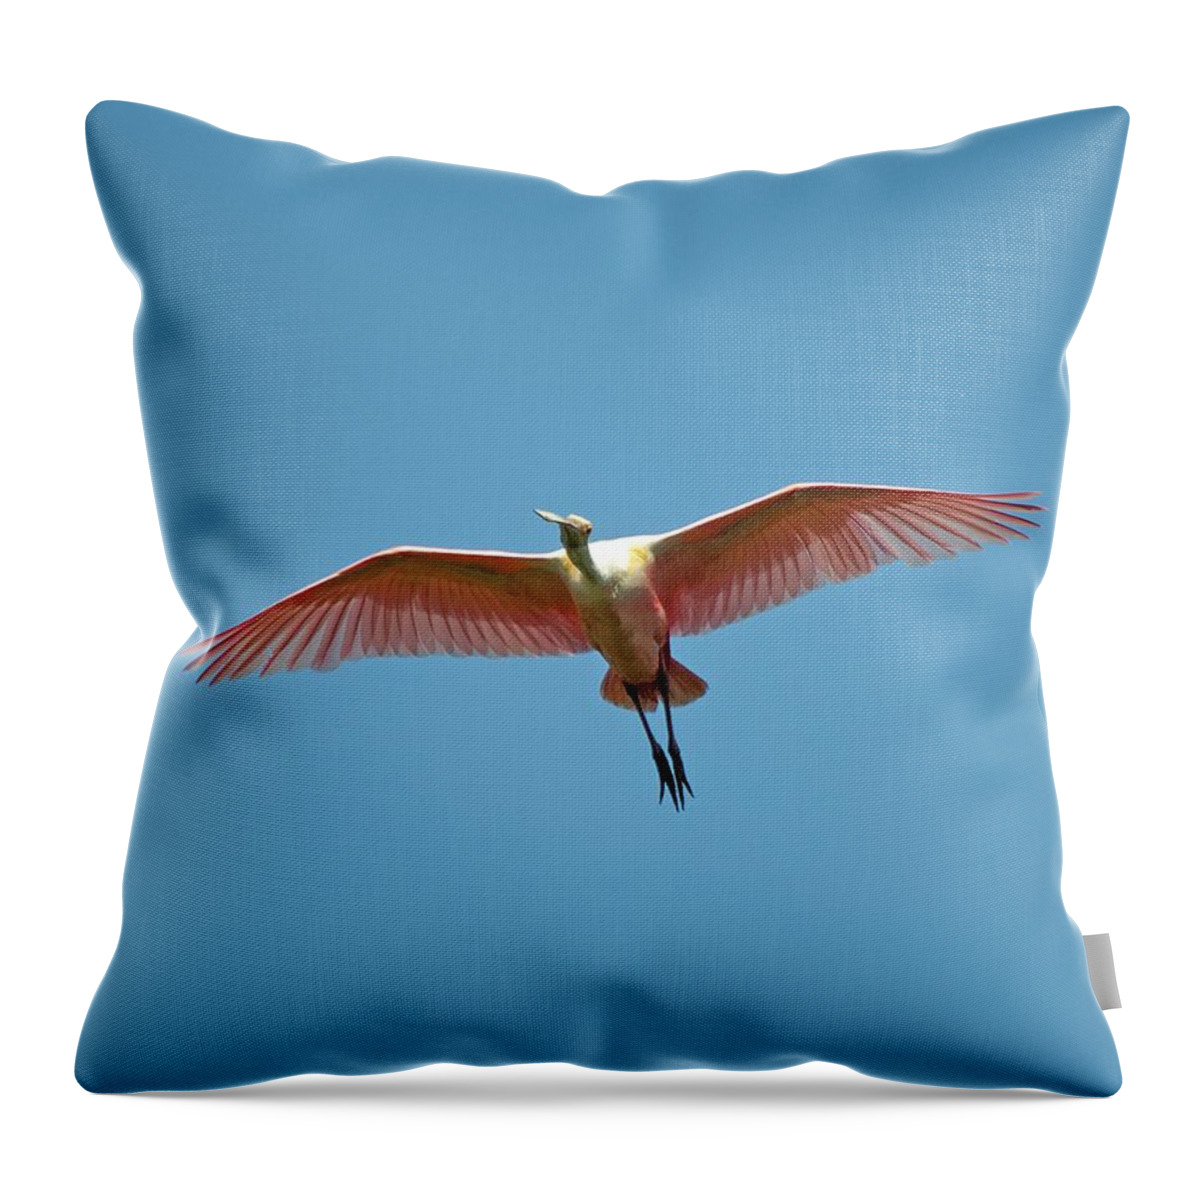 Heron Throw Pillow featuring the photograph Soaring Roseate Spoonbill by Kenneth Albin